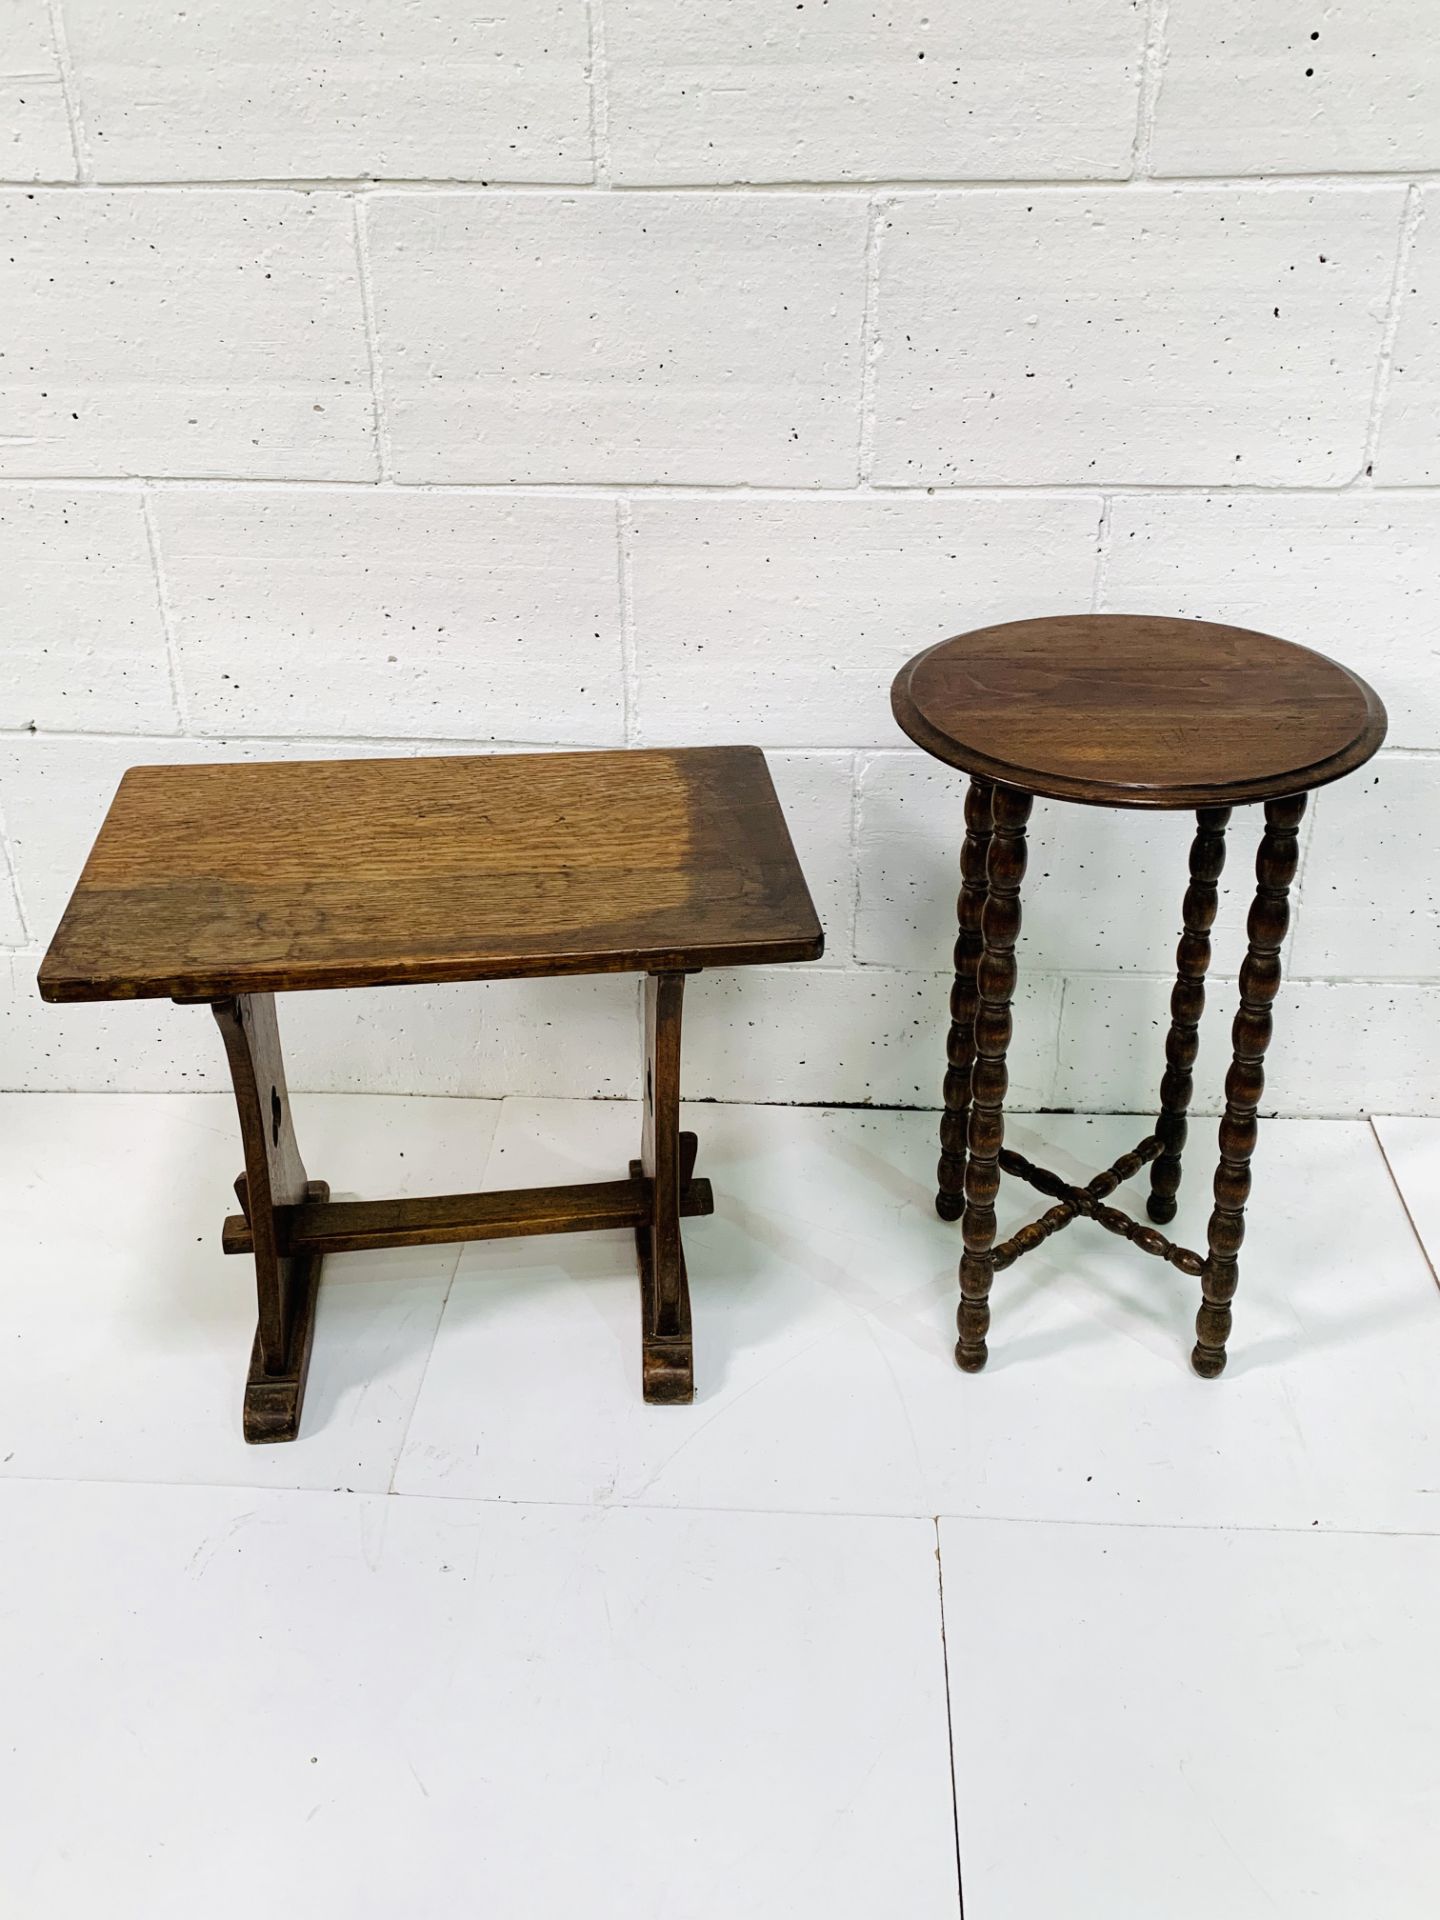 Oak pegged low table with stretcher, together with a mahogany circular display table.